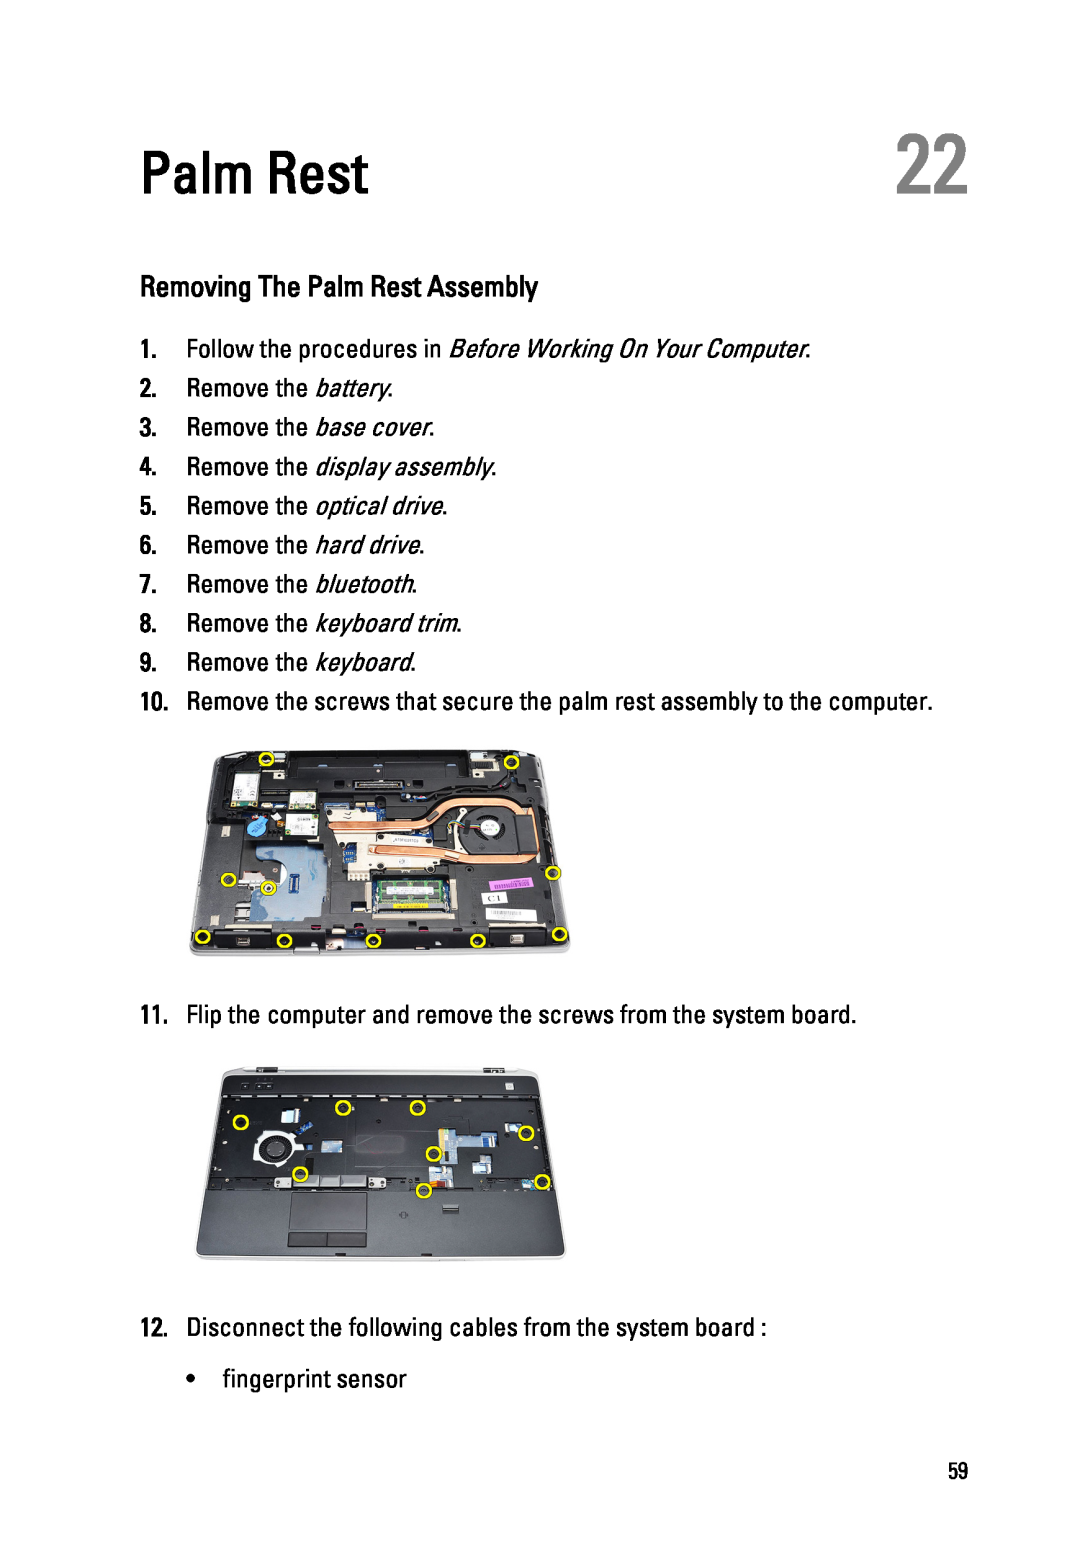 Dell E6520 owner manual Removing The Palm Rest Assembly, Remove the display assembly 5. Remove the optical drive 